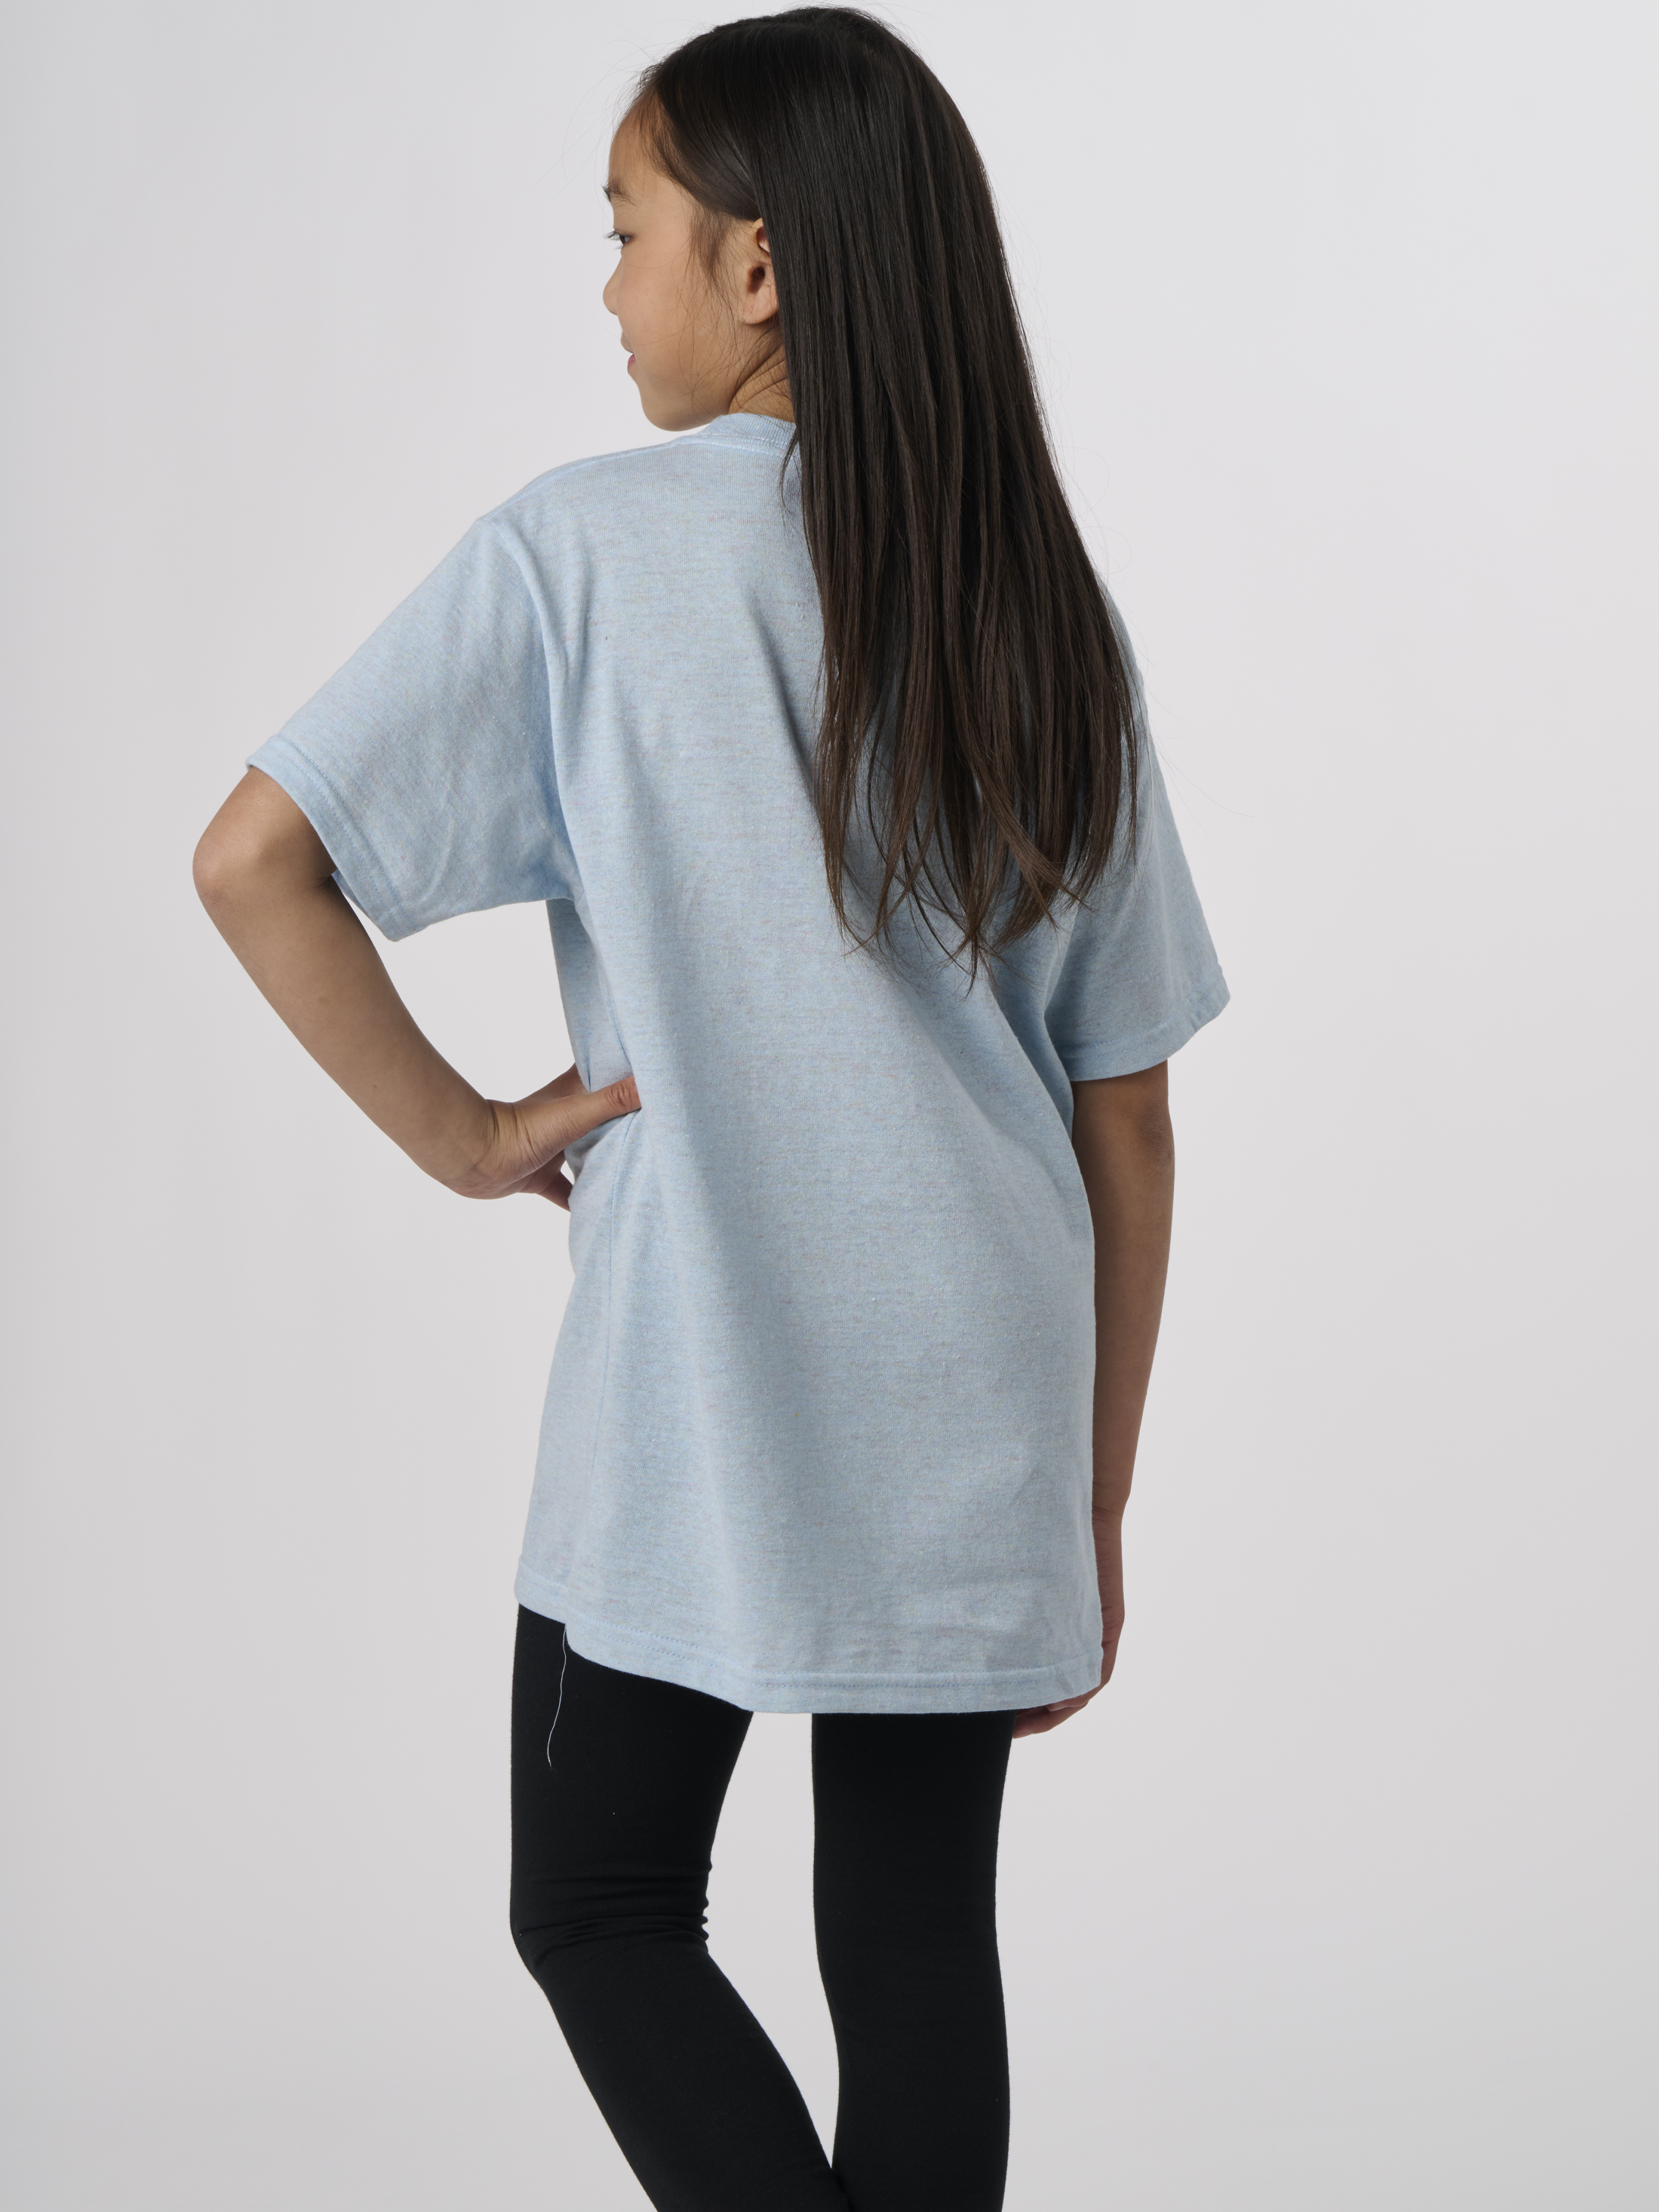 RECOVER_RY100_YOUTHCLASSICSHORTSLEEVETSHIRT_COOLERBLUE_BACK.png